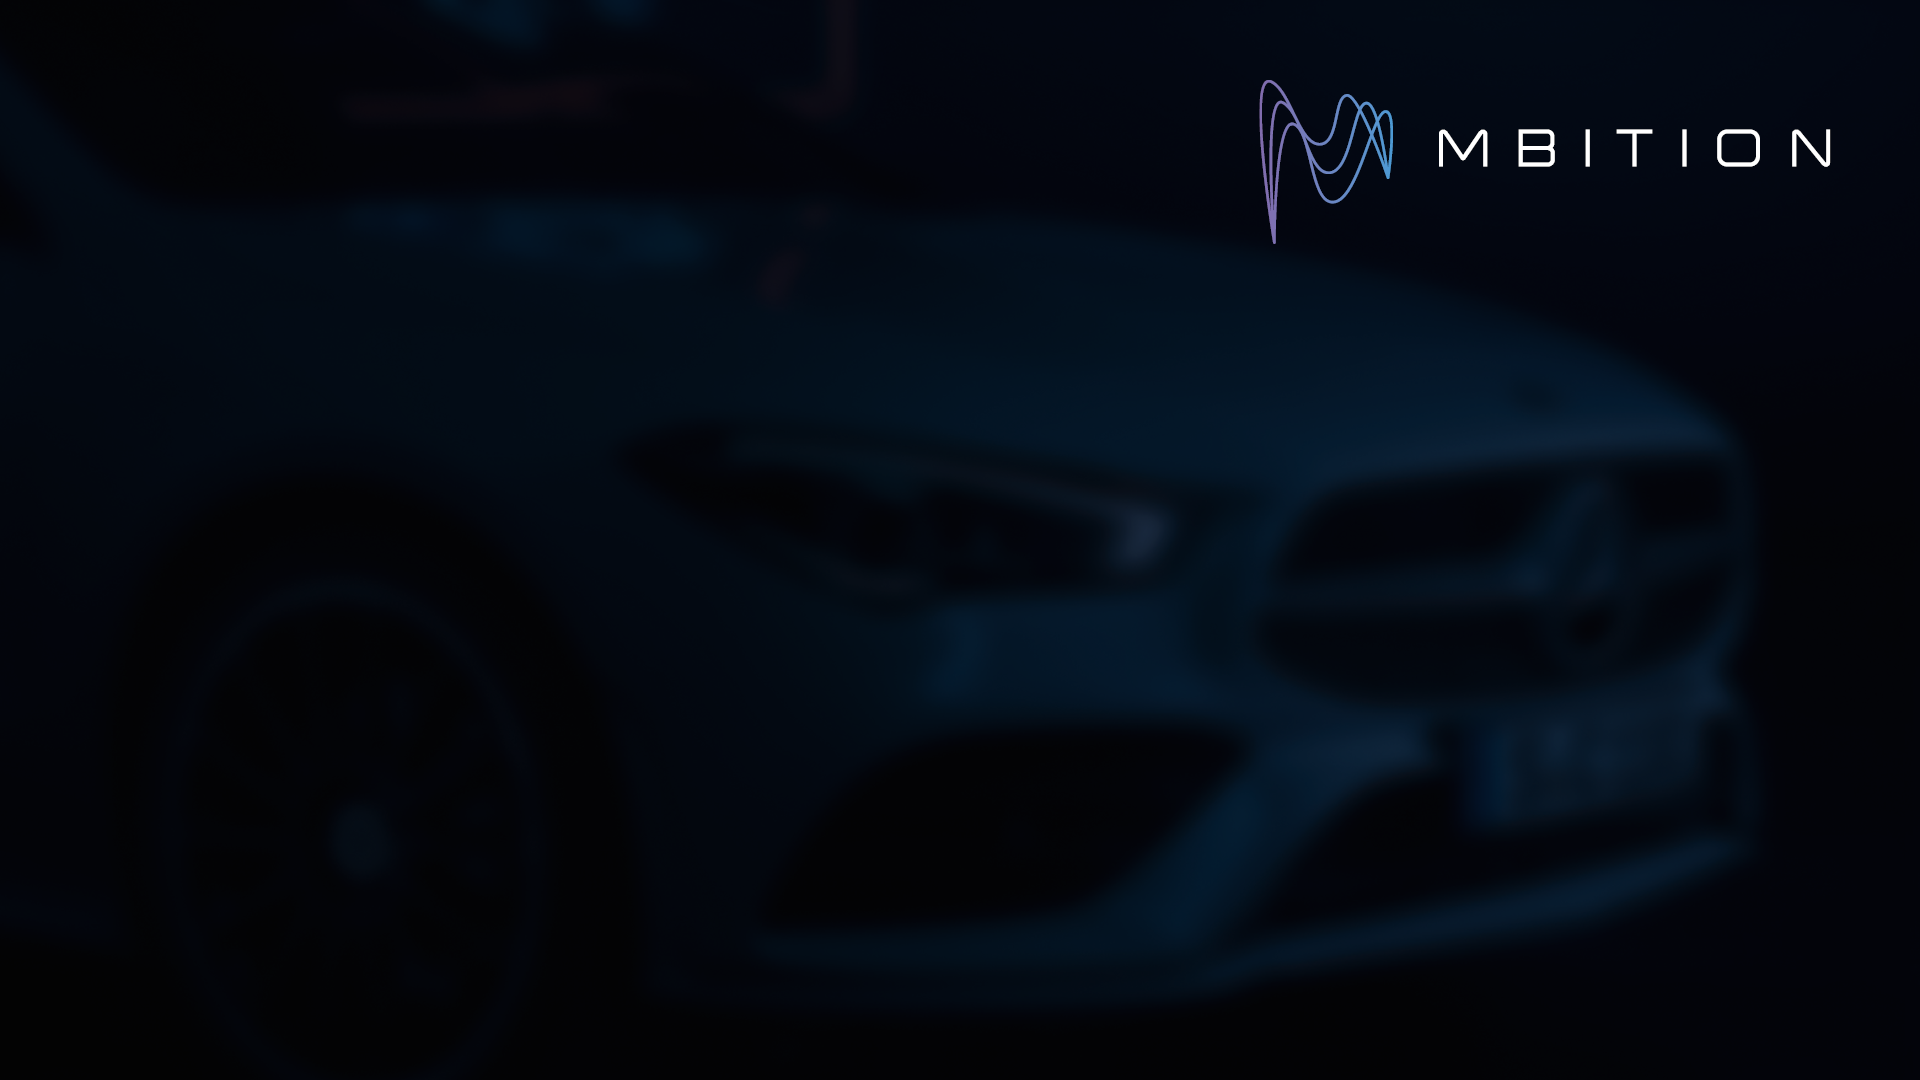 Desktop background with Mbition logo and a car